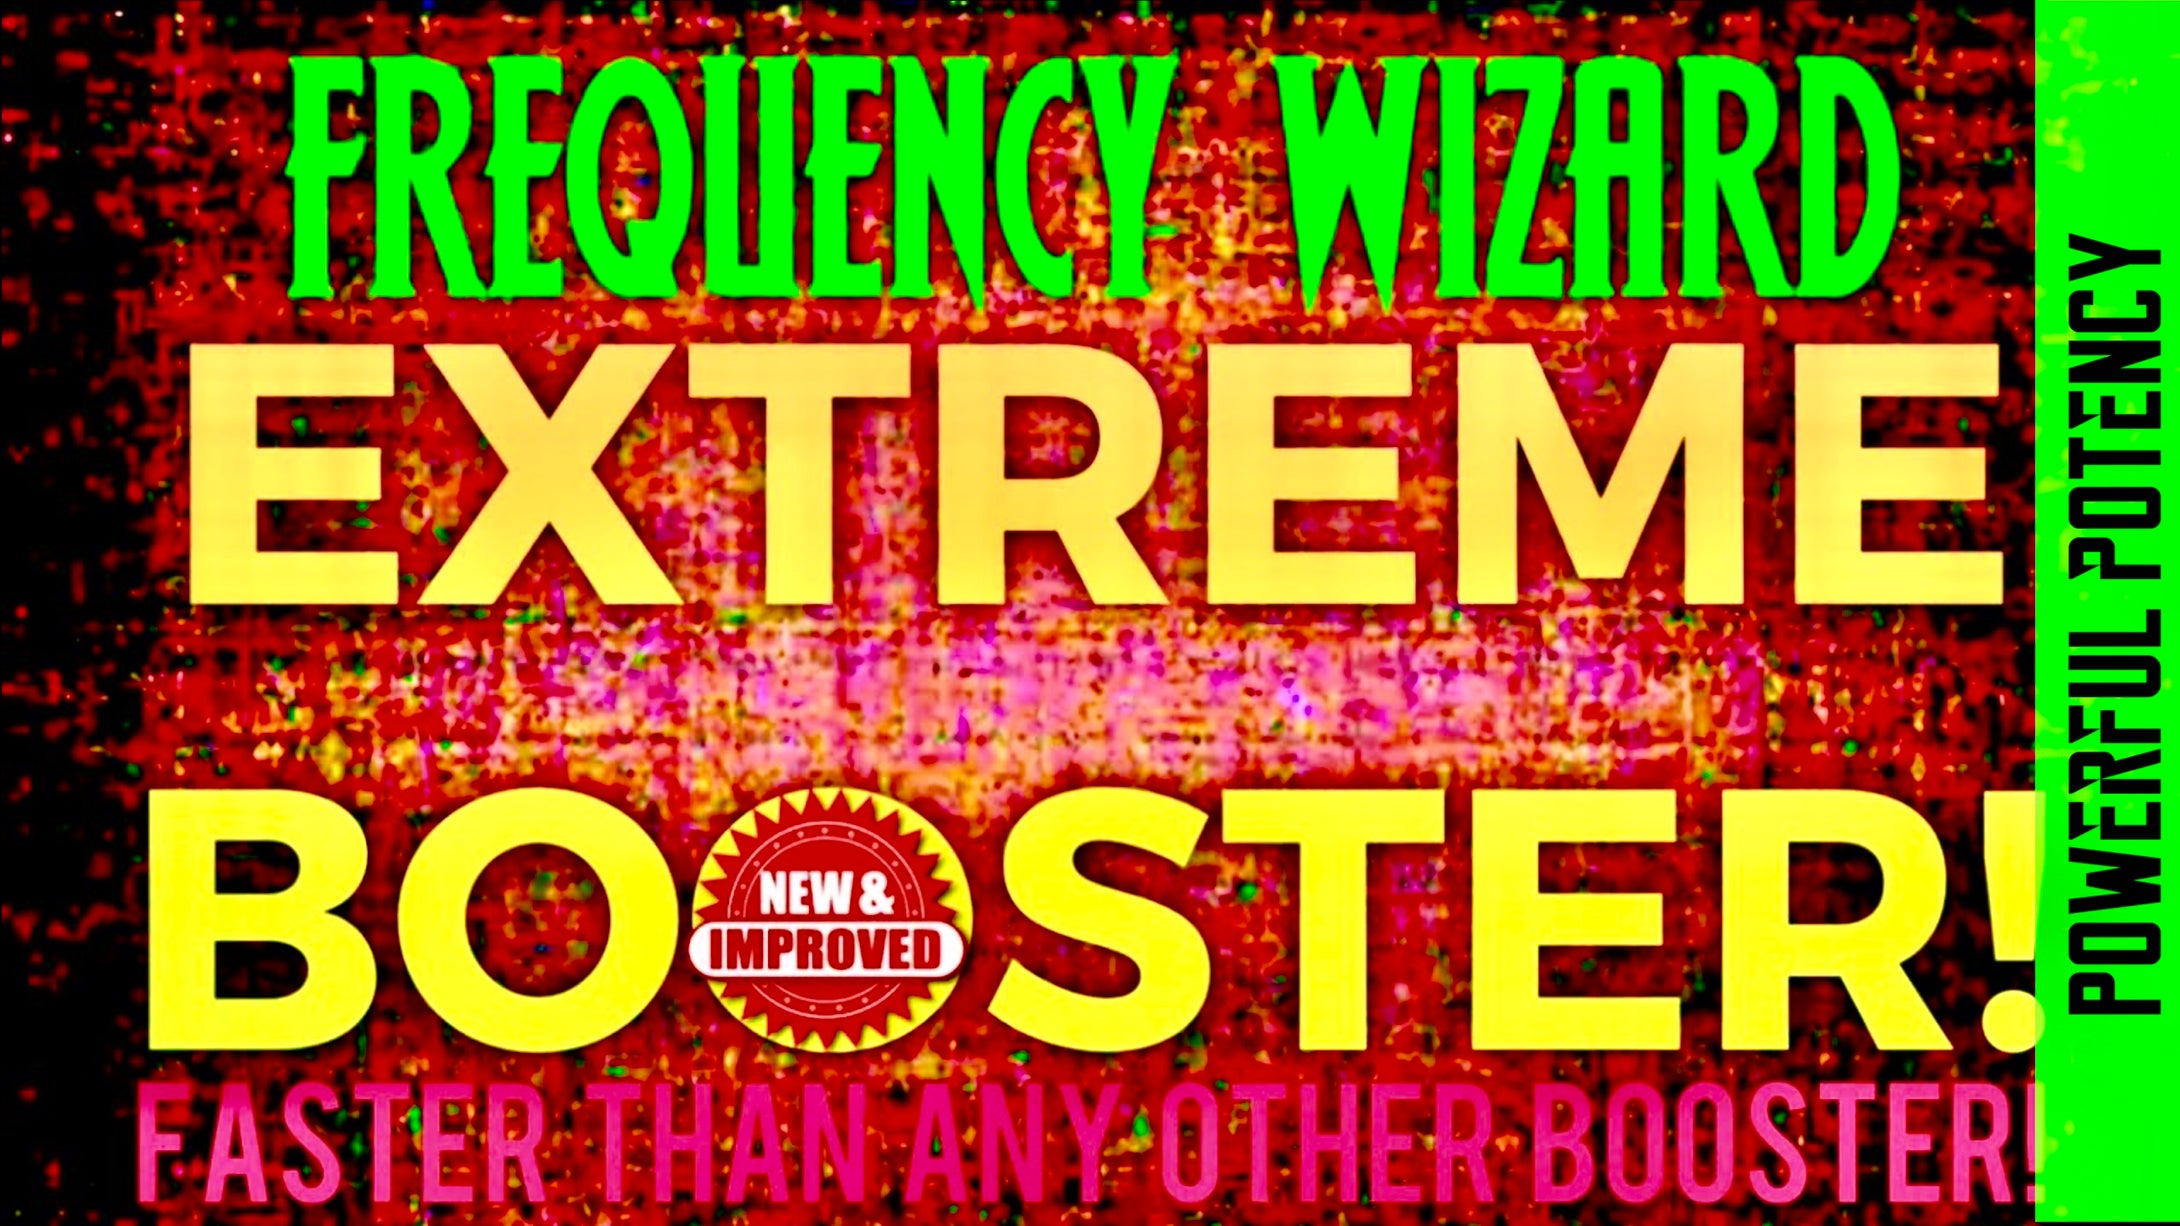 EXTREME SUBLIMINAL BOOSTER! FASTER THAN ANY OTHER BOOSTER! GET YOUR RESULTS NOW!